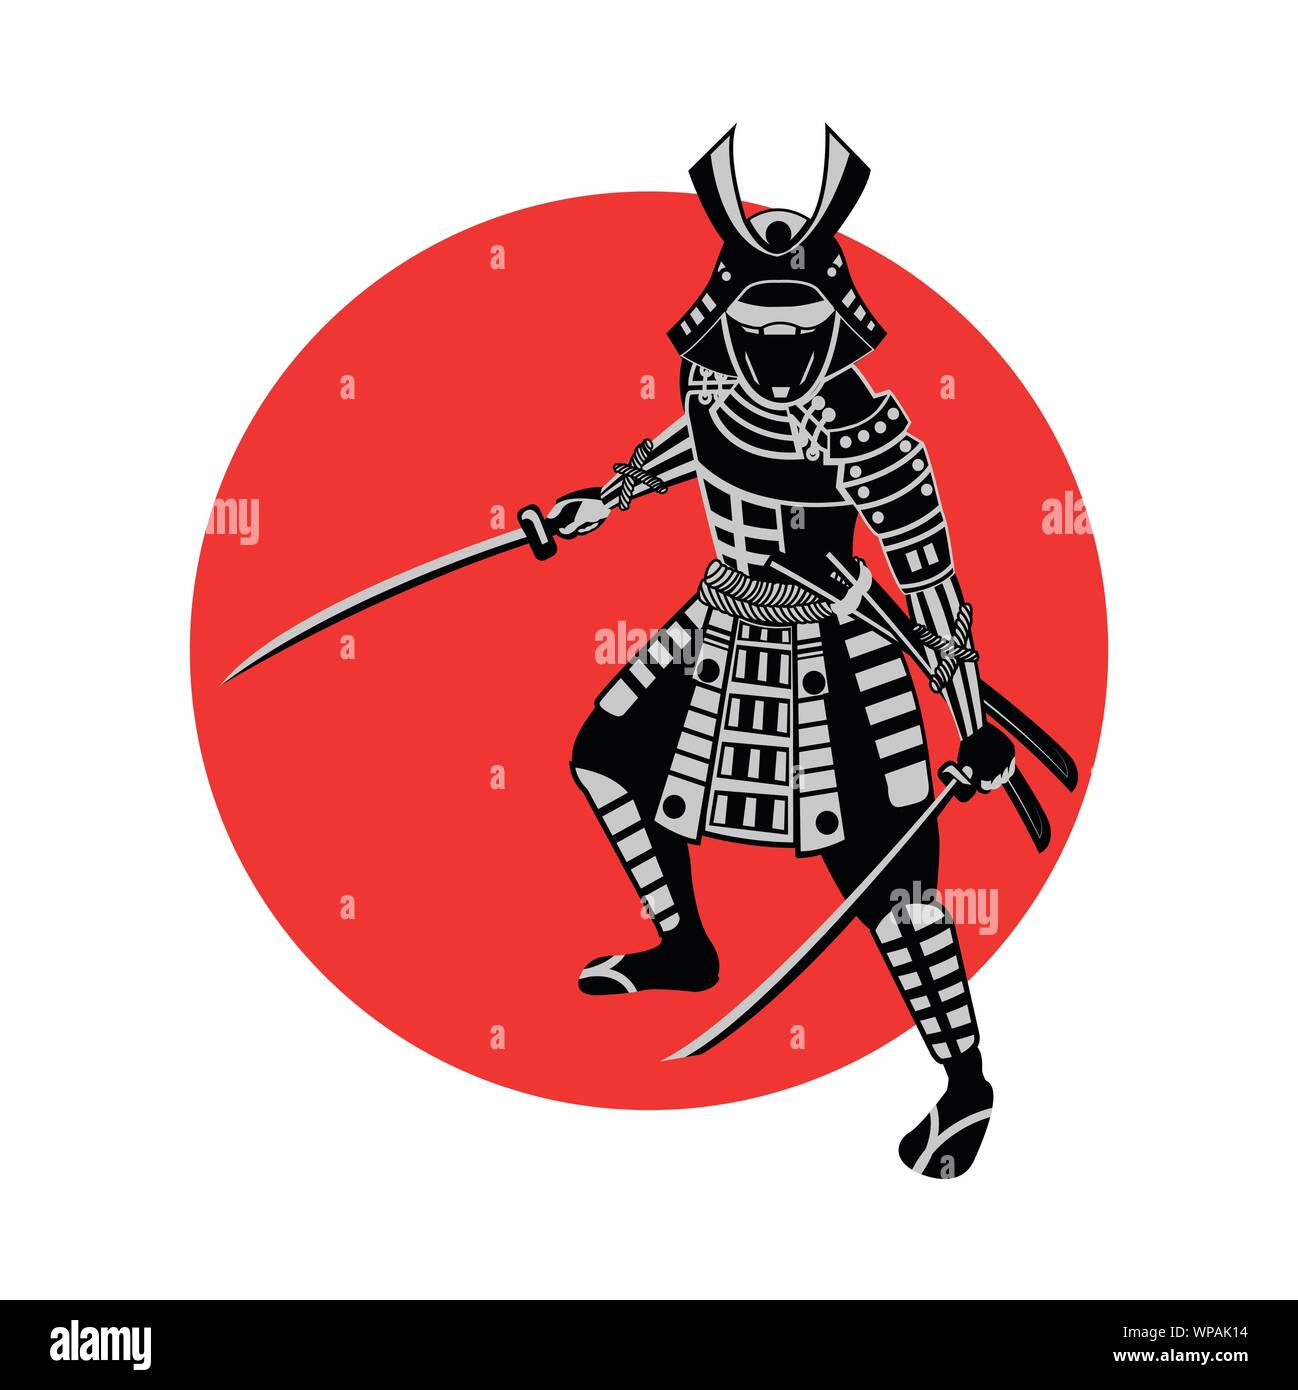 Samurai hold sword in front of red circle,warrior of japan,monochrome realistic design,vector illustration Stock Vector